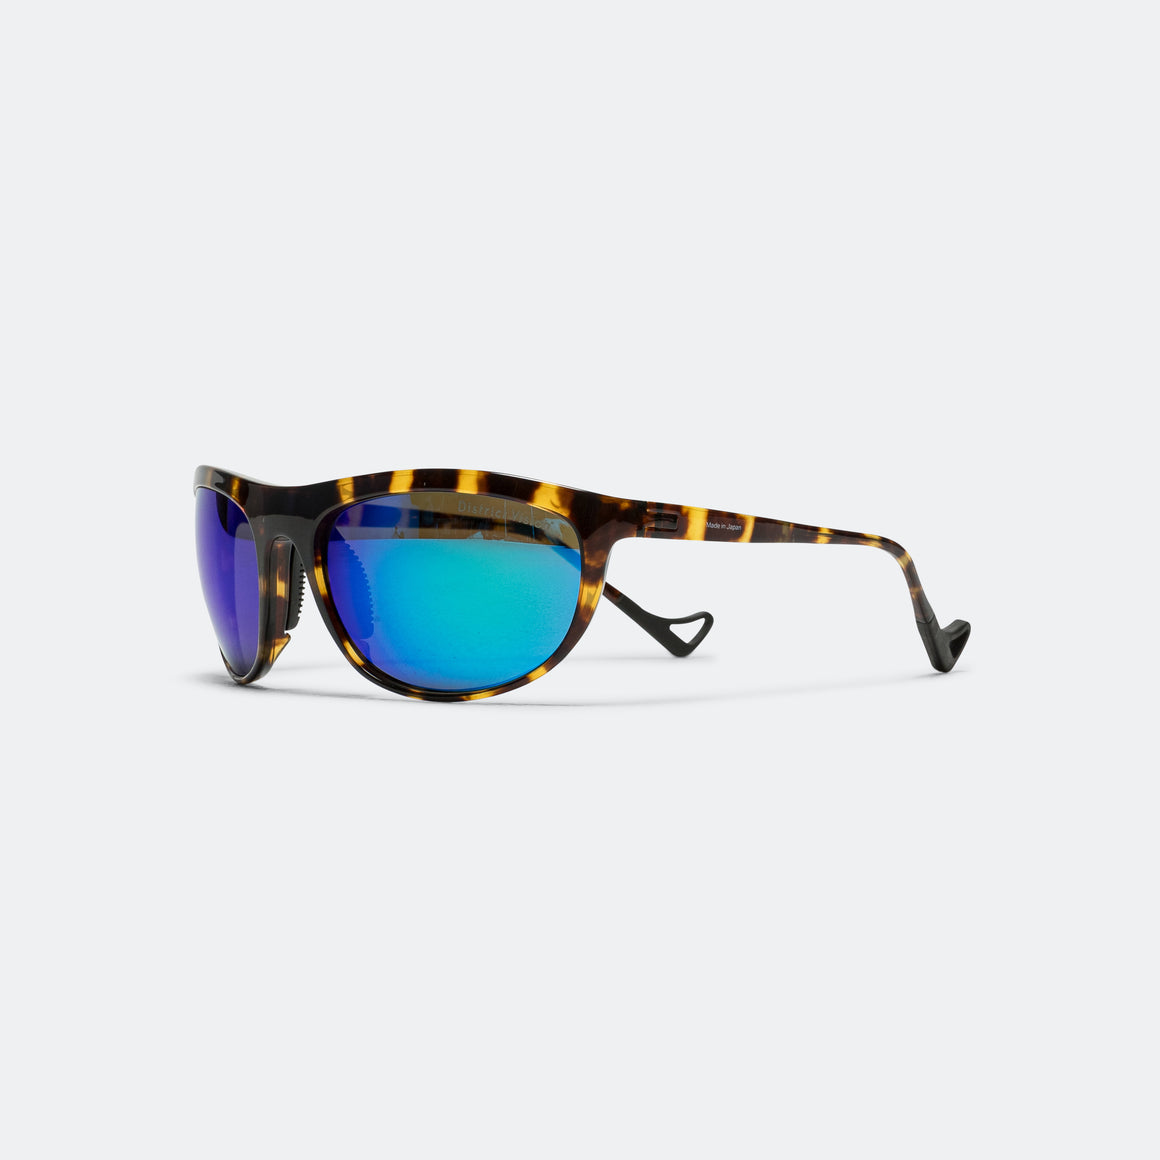 District Vision - Takeyoshi Altitude Master Tortoise/D+ Blue Mirror - Up There Athletics